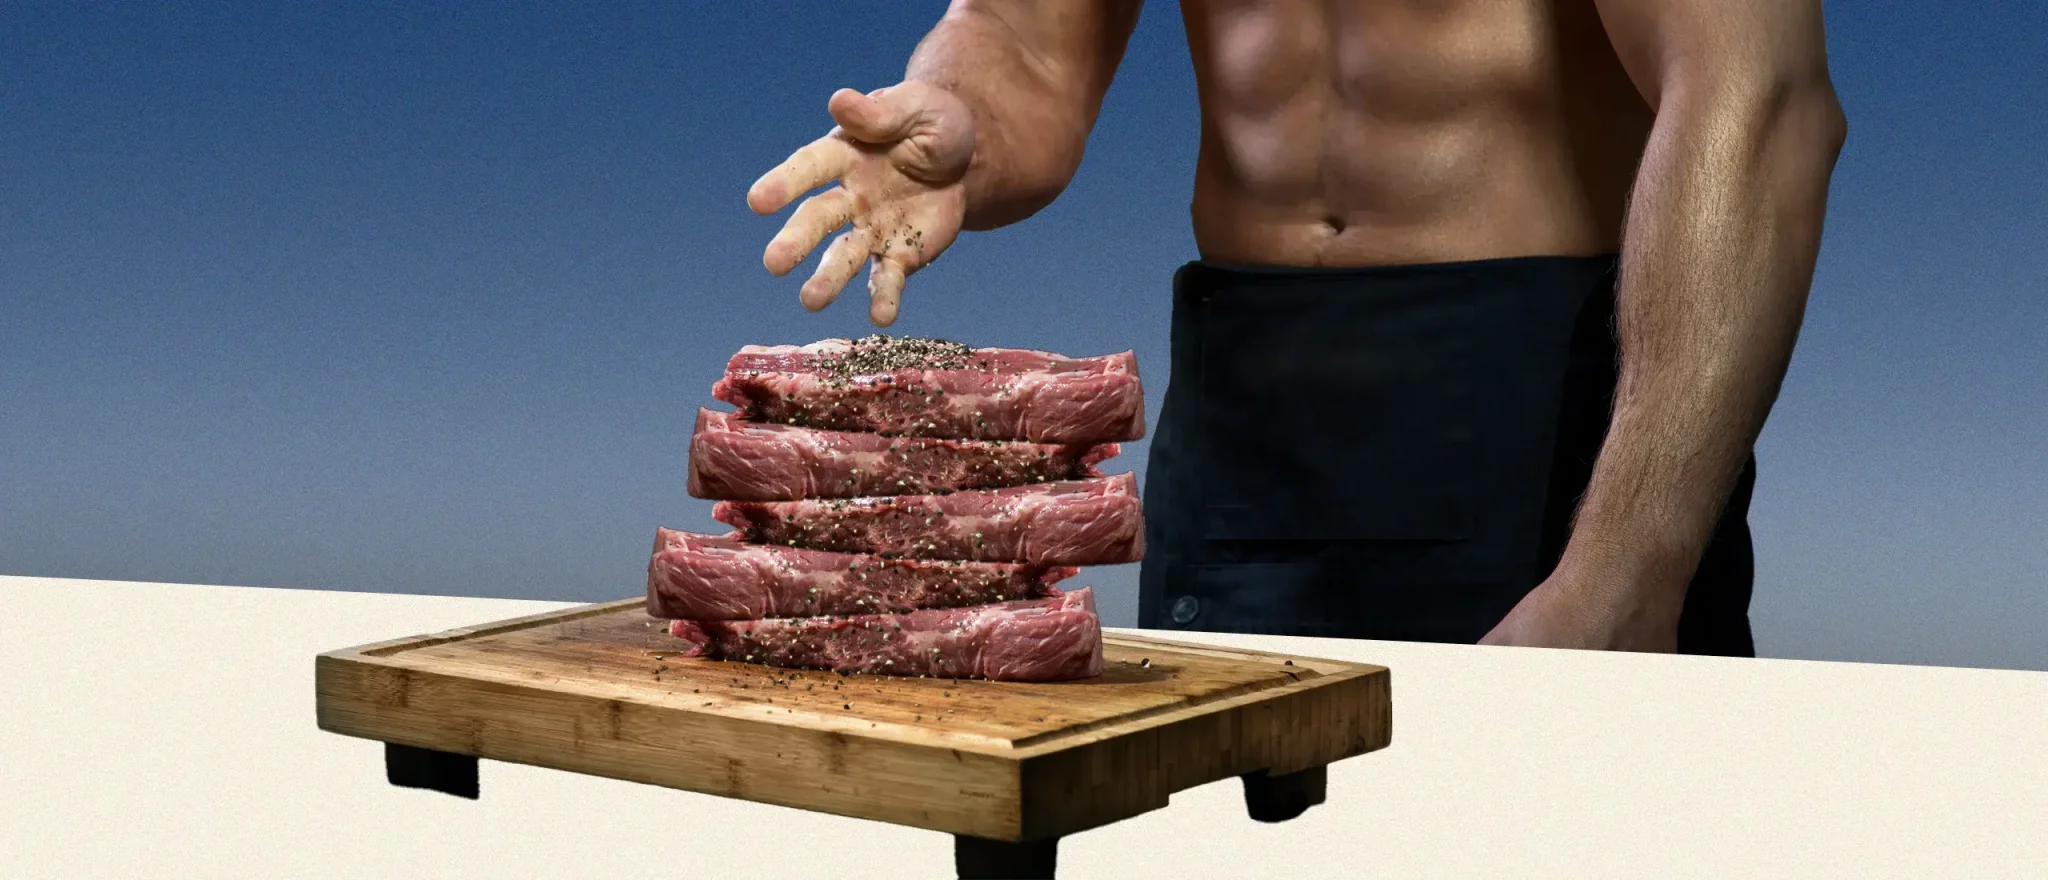 New Study Suggests There’s No Such Thing as Too Much Protein